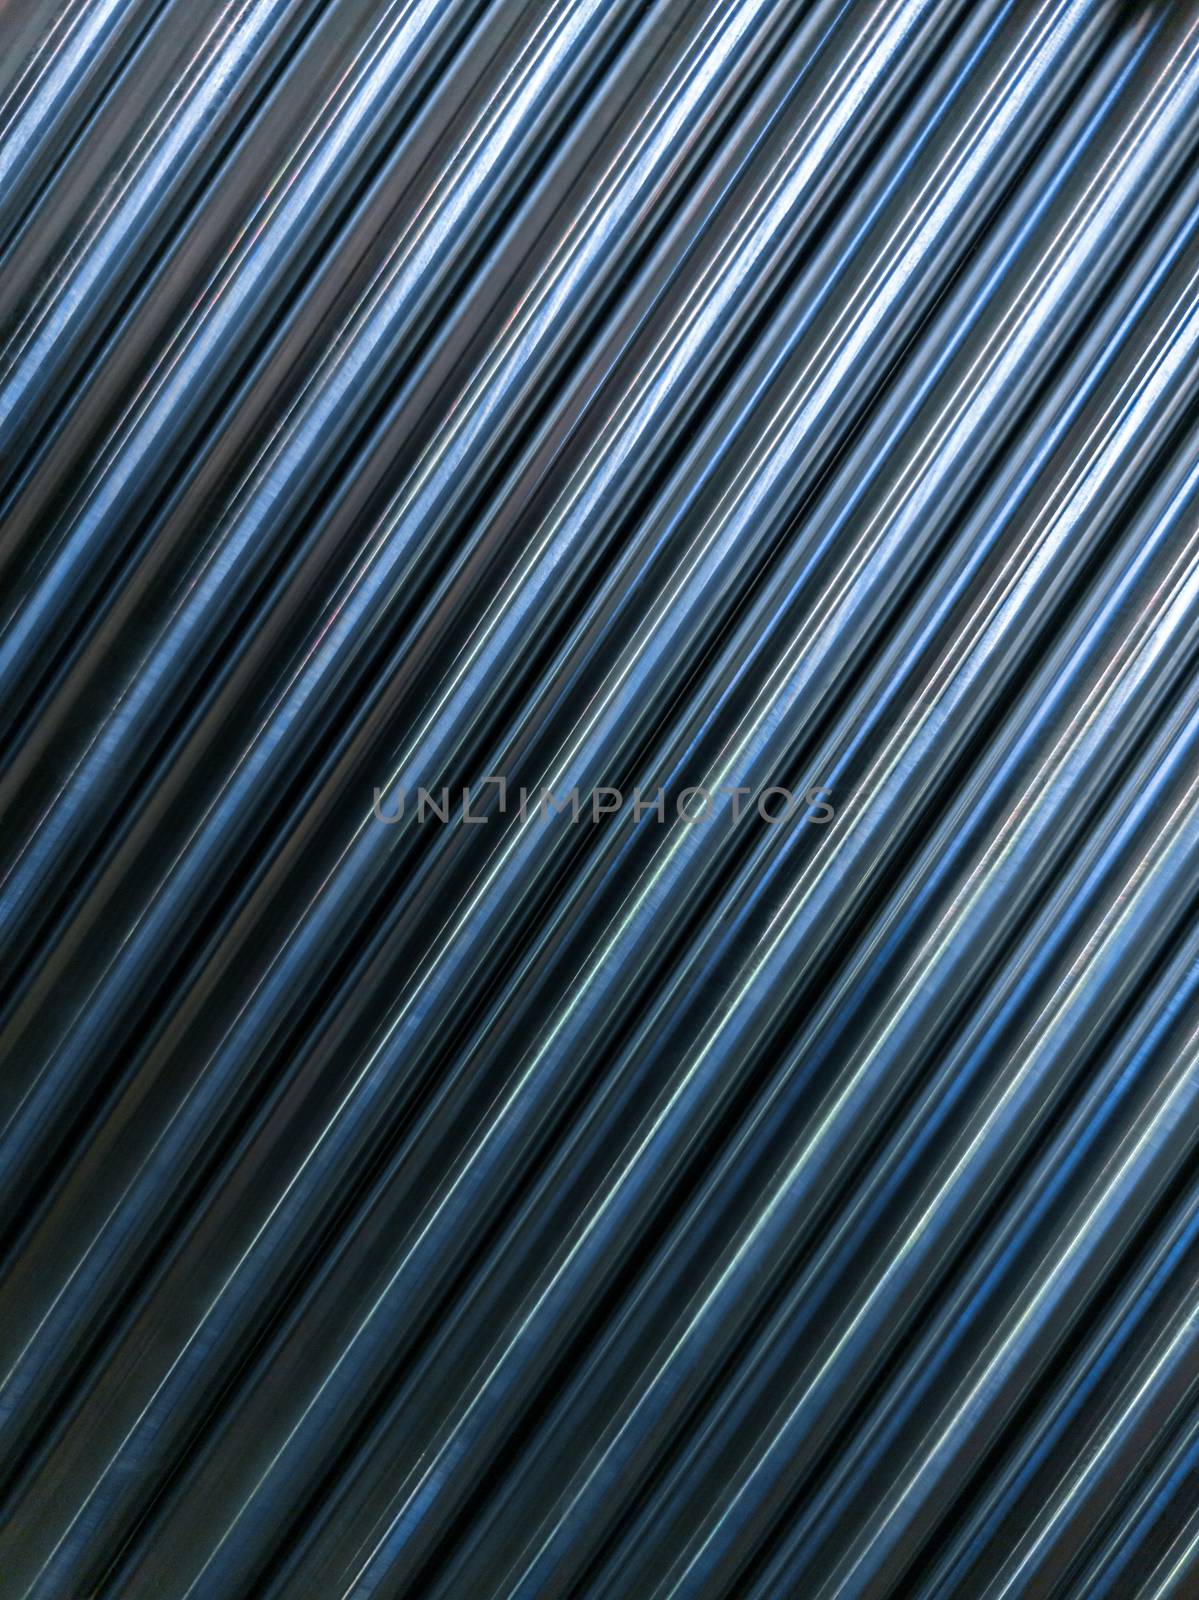 abstract industrial background of many shiny cnc turned rods with flat lay diagonal geometric composition by z1b